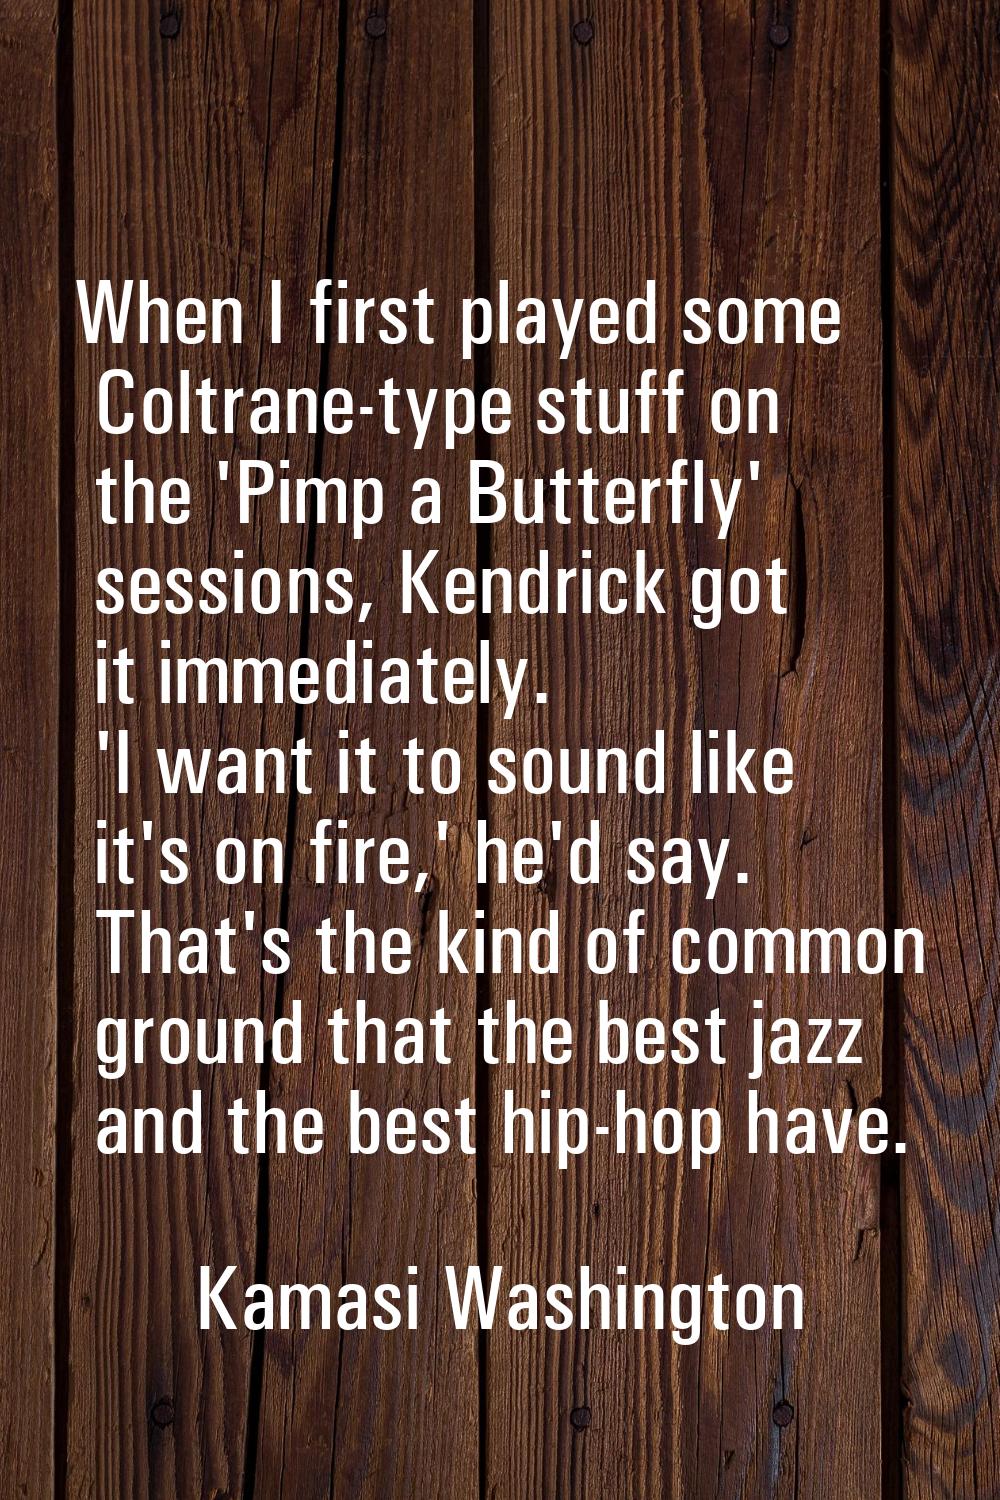 When I first played some Coltrane-type stuff on the 'Pimp a Butterfly' sessions, Kendrick got it im